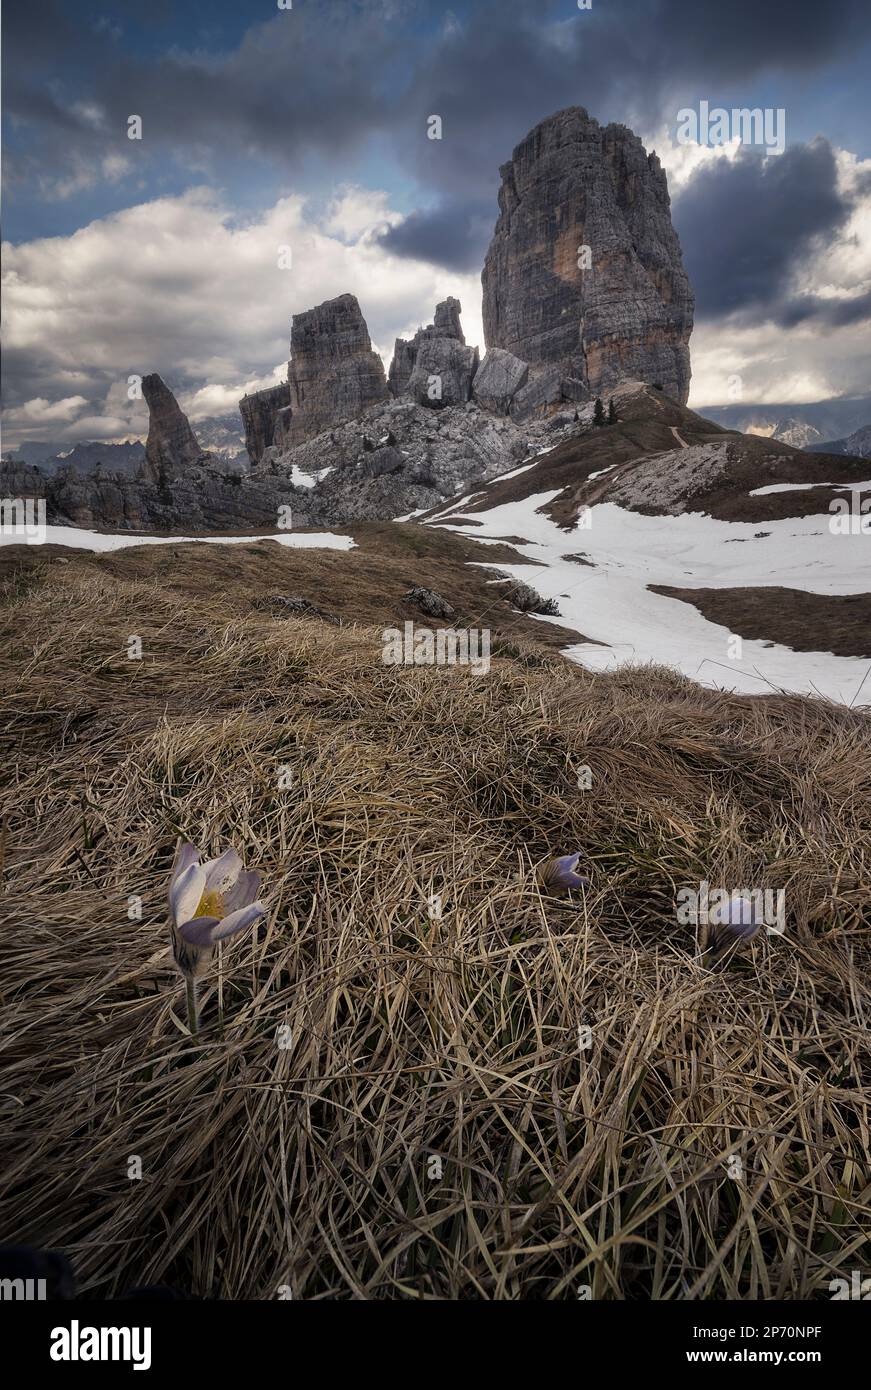 Cinque Torri rock formation in Cortina d'Ampezzo, Italy in late spring Stock Photo